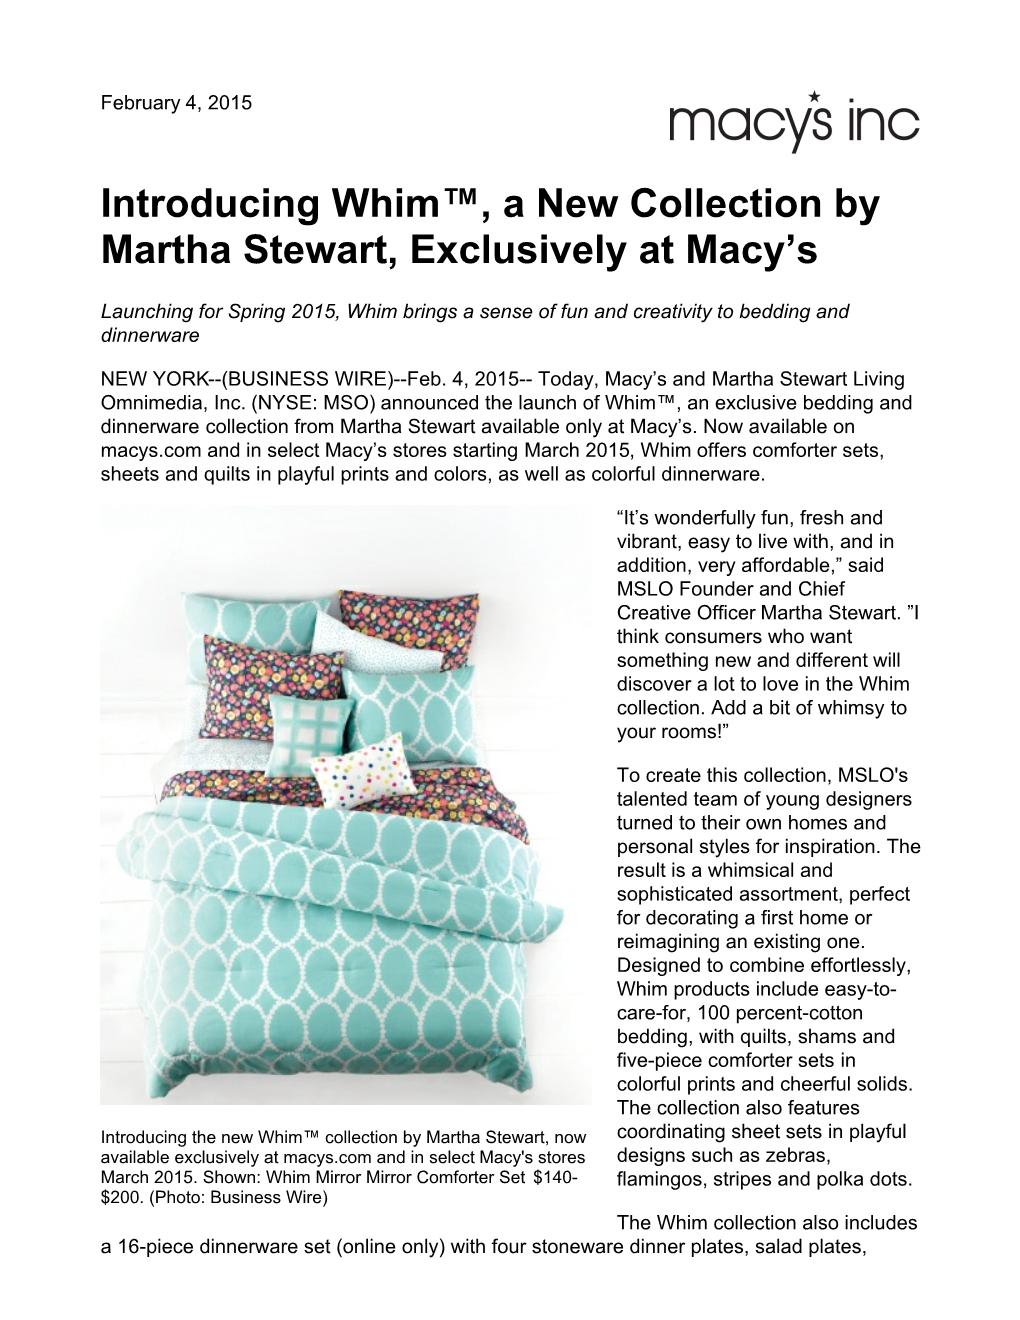 Introducing Whim™, a New Collection by Martha Stewart, Exclusively at Macy’S